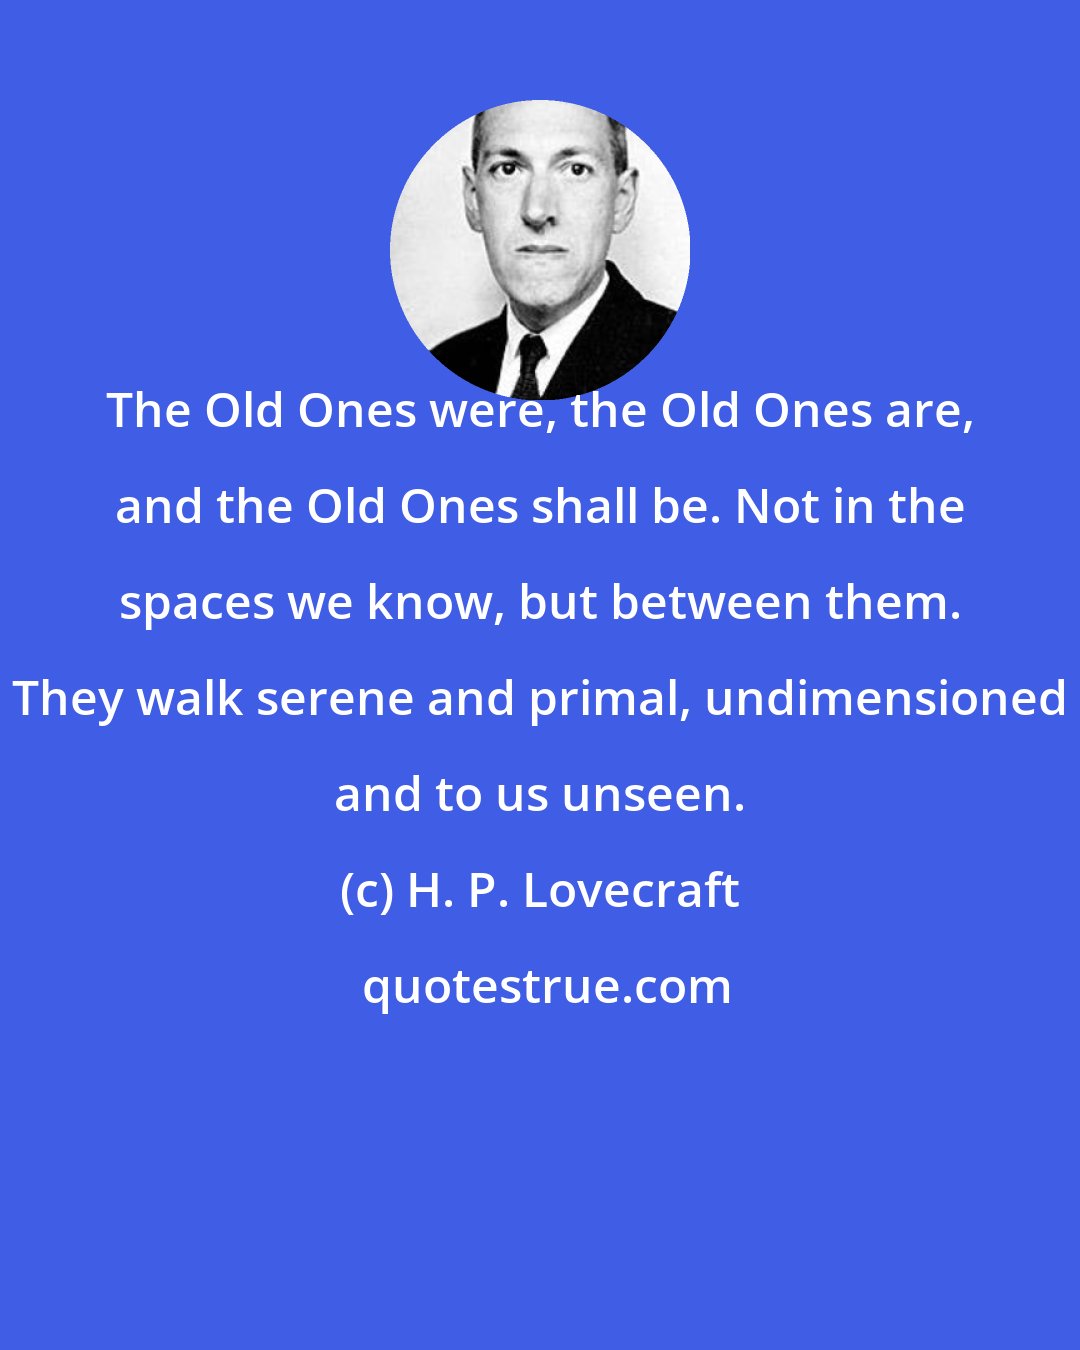 H. P. Lovecraft: The Old Ones were, the Old Ones are, and the Old Ones shall be. Not in the spaces we know, but between them. They walk serene and primal, undimensioned and to us unseen.